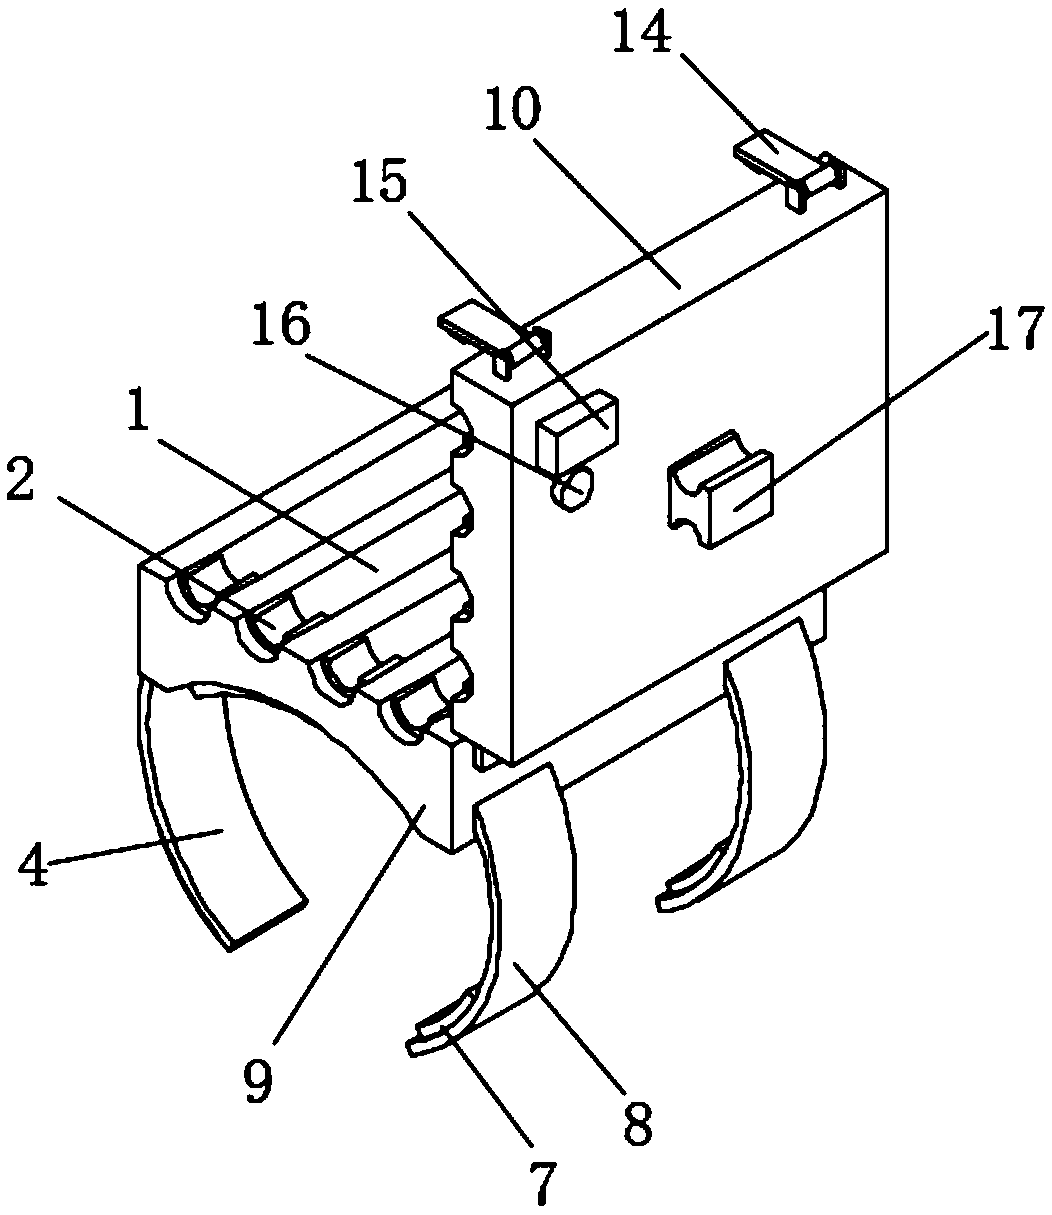 A hemodialysis pipe fixing device